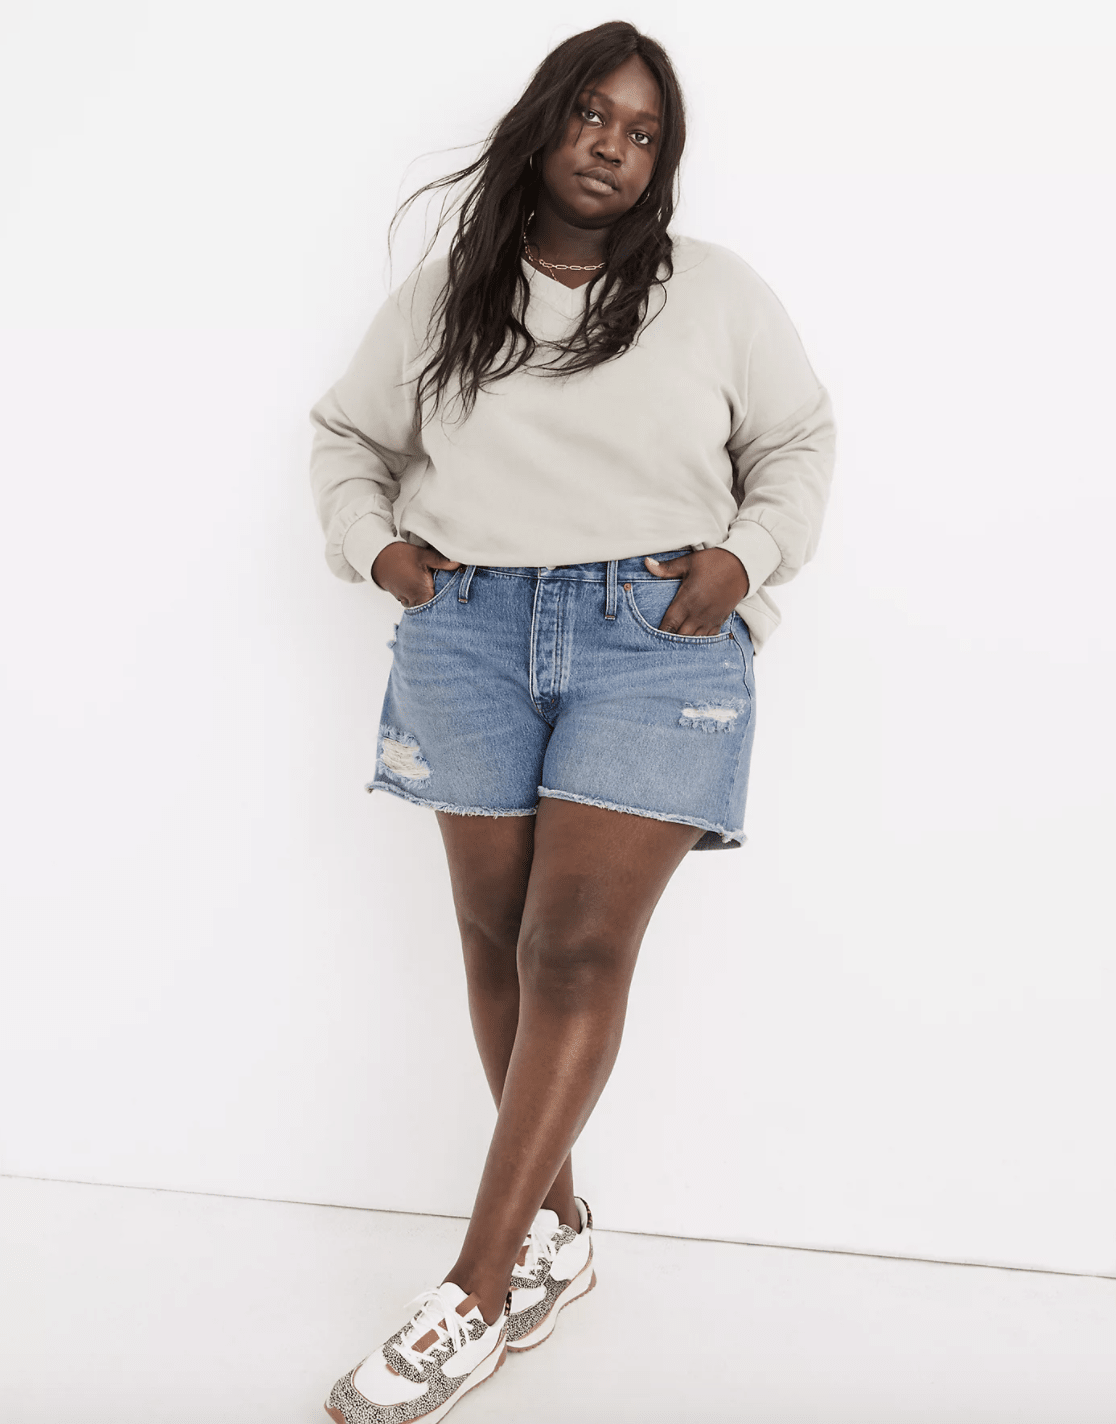 The Best Denim Shorts for Grown Women: 50+ Options, Size-Inclusive